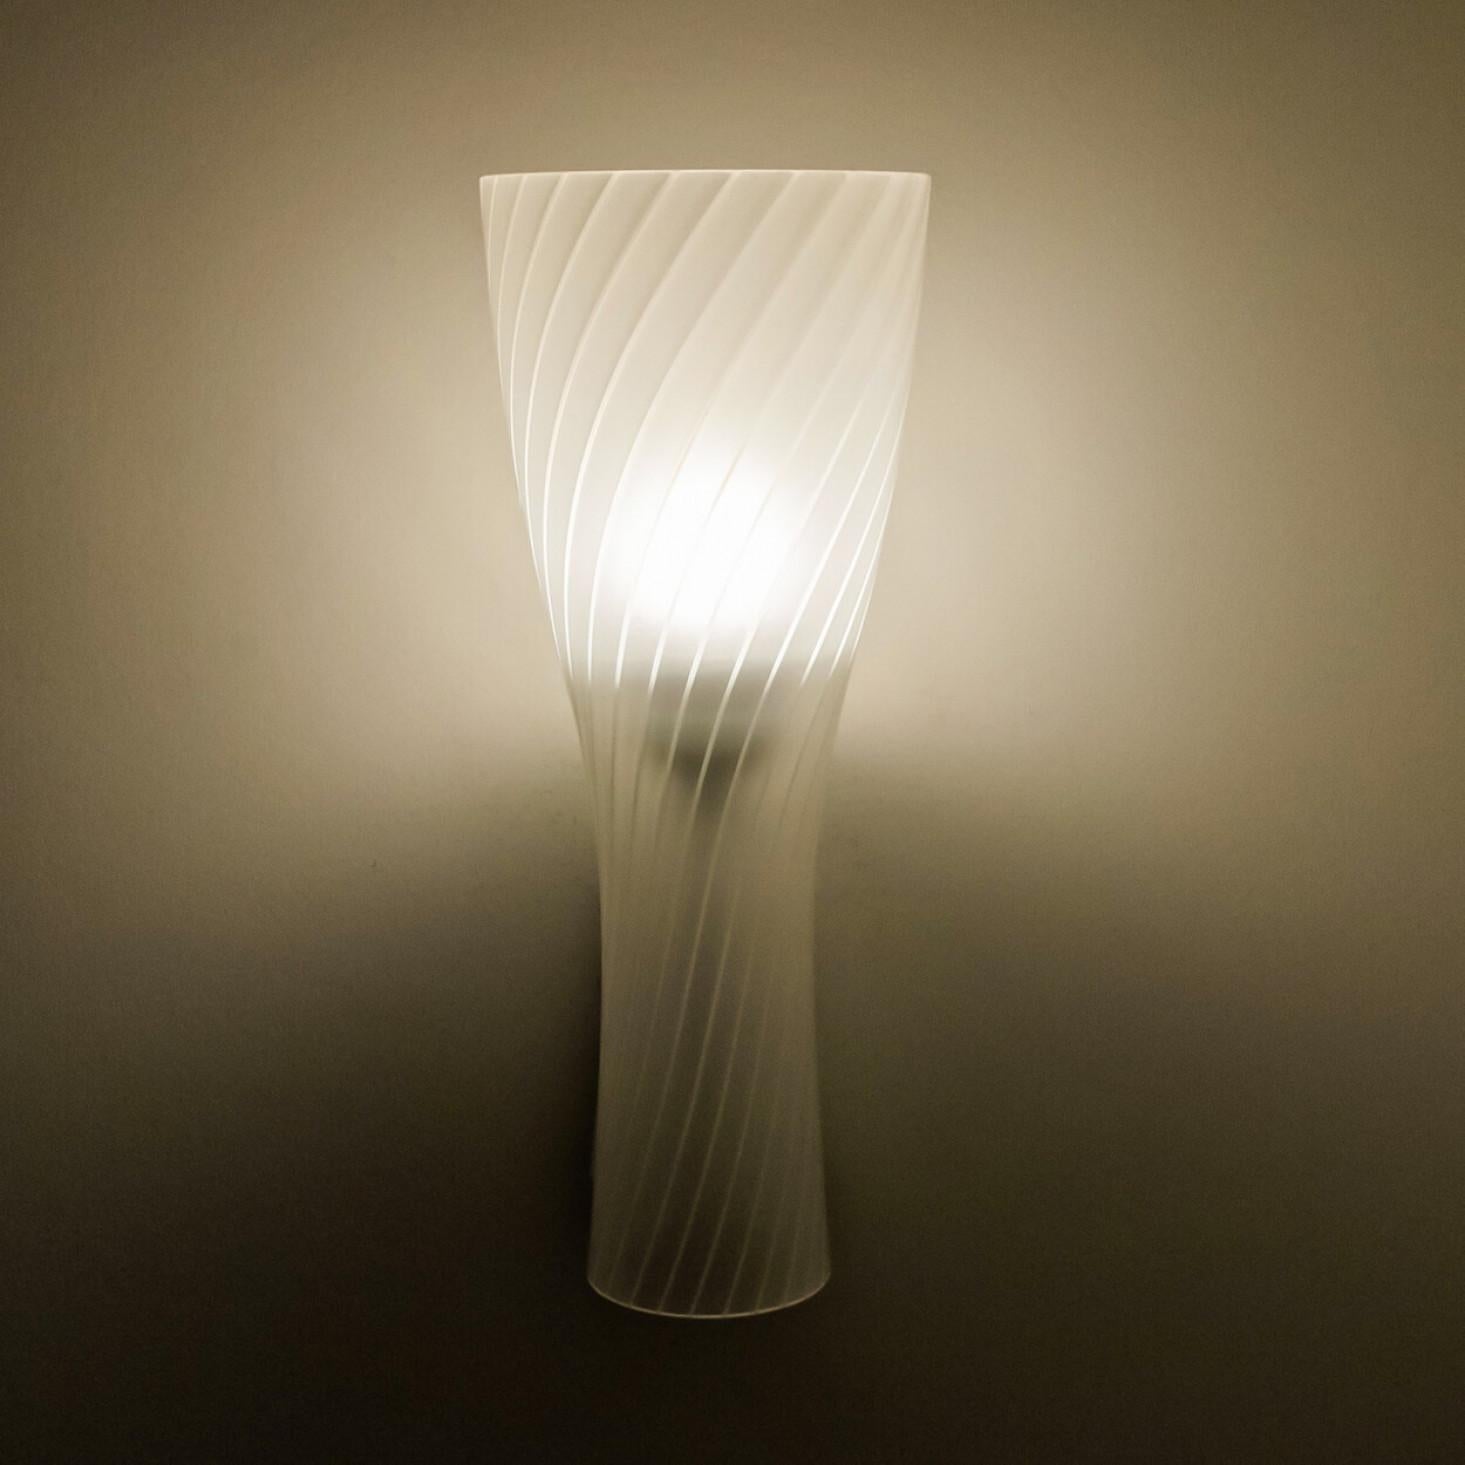 Six beautiful mid-20th century wall lights by Gangkofner, made for Peill. Made around 1970 in Germany, Europe. Featuring a large clear white glass shade with stripes along the length of it. The light illuminates wonderful.

Dimensions:
Height: